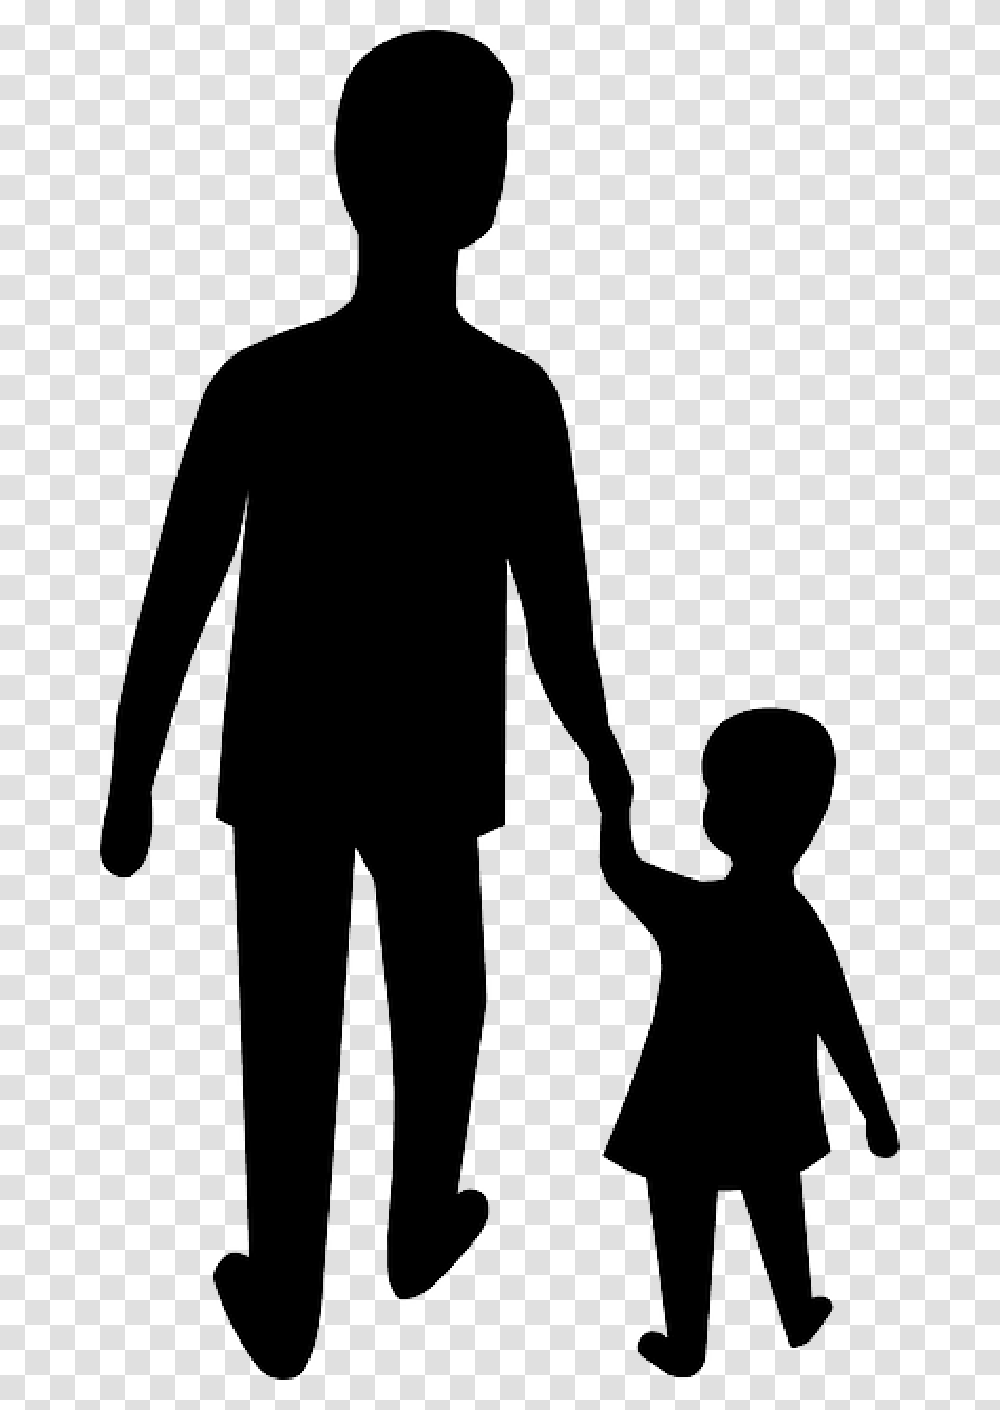 Outline Symbol Hand People Kid Silhouette Adult Adult And Child Holding Hands Cartoon, Person, Human, Family Transparent Png